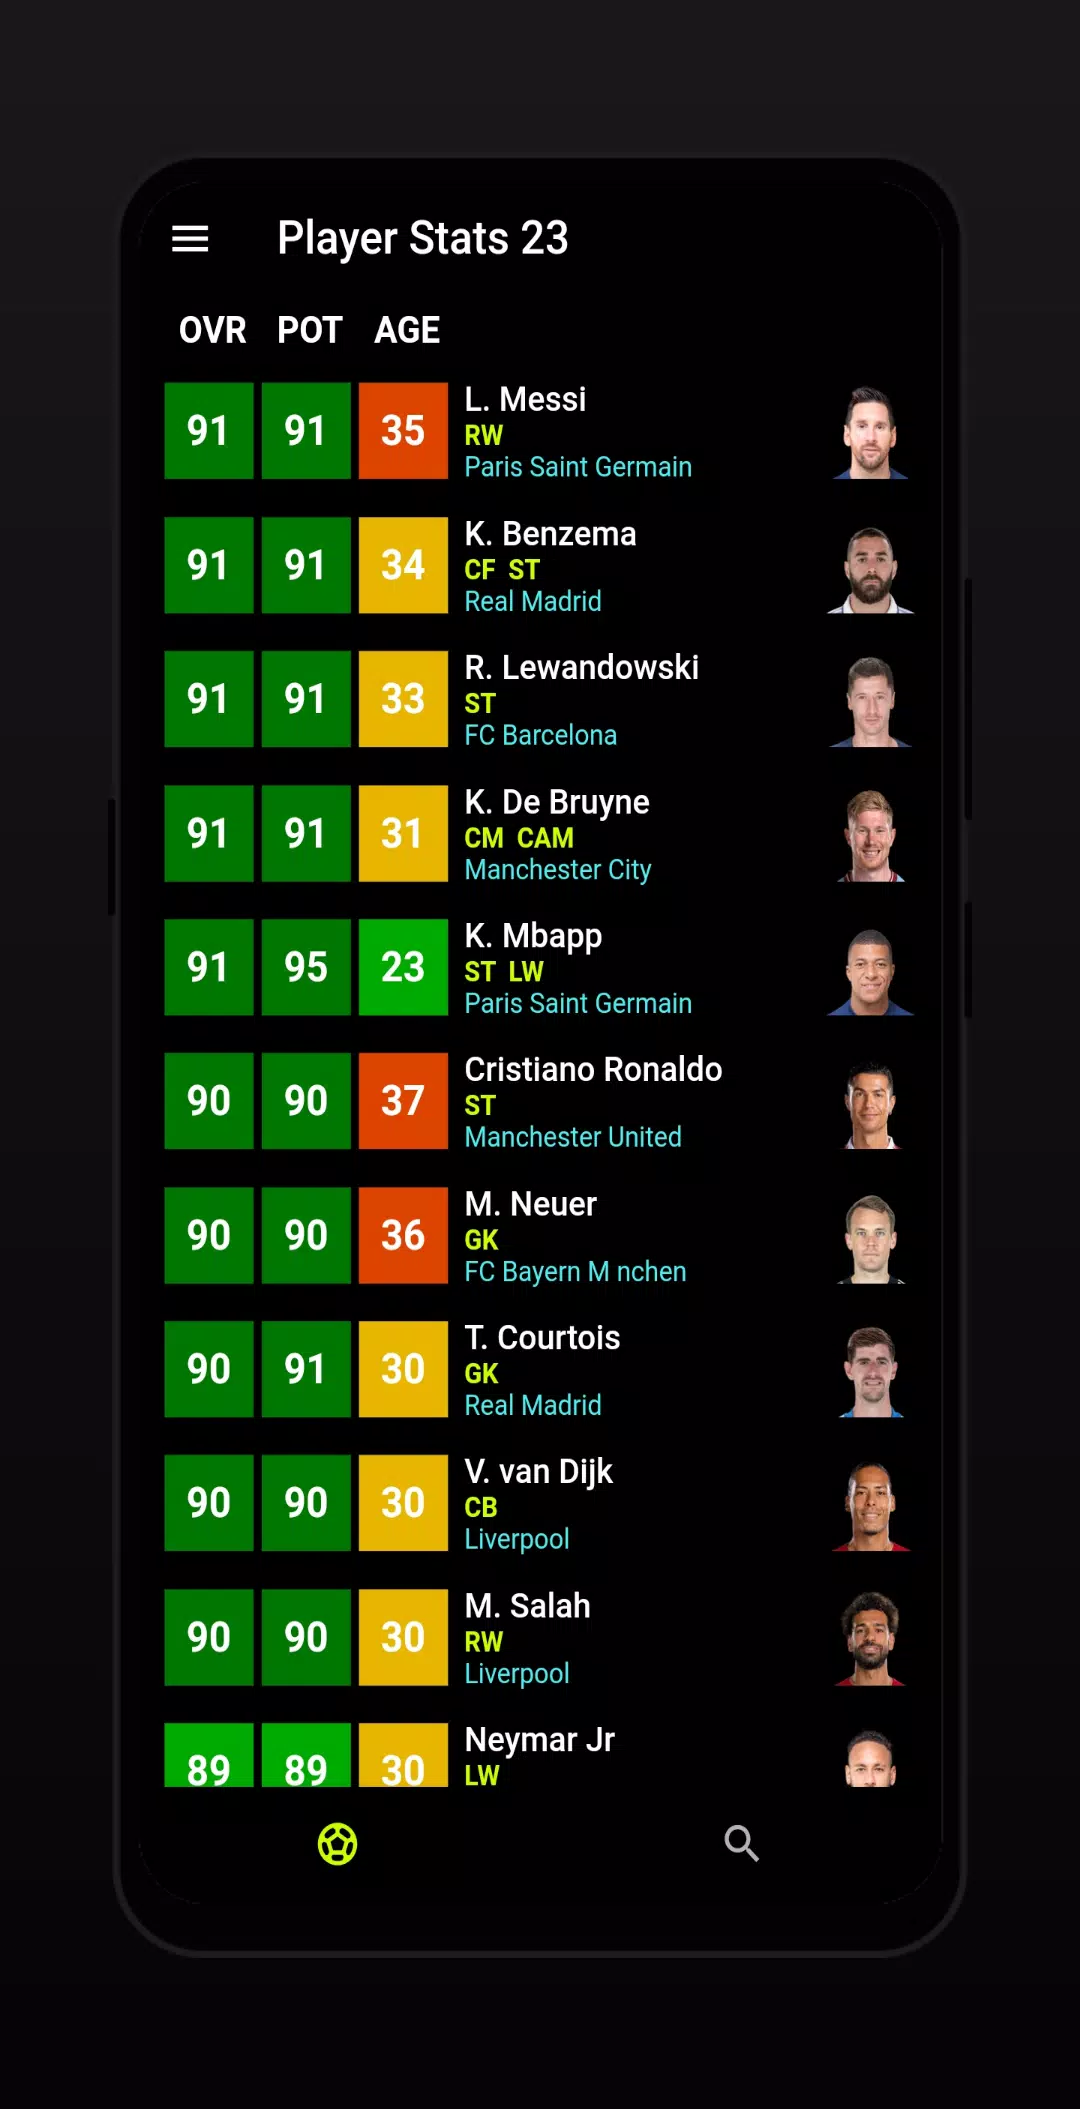 Players stats on companion app, why do the stats show other club